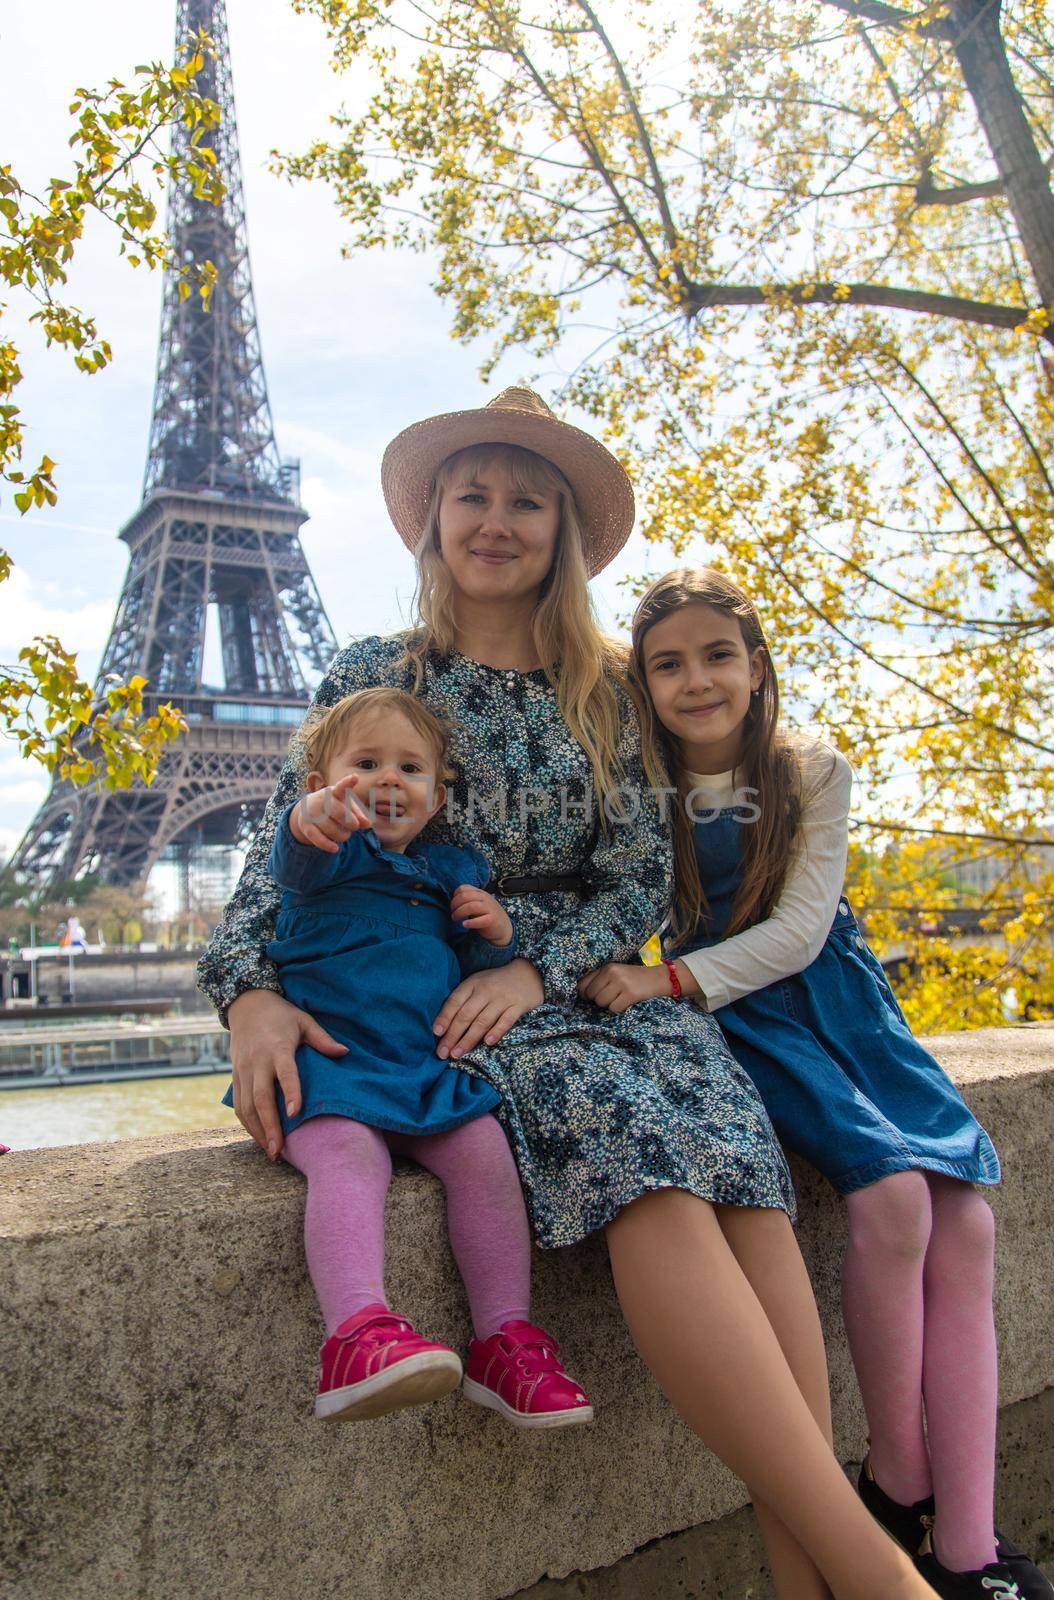 Woman with children near the eiffel tower. Selective focus. Kids.